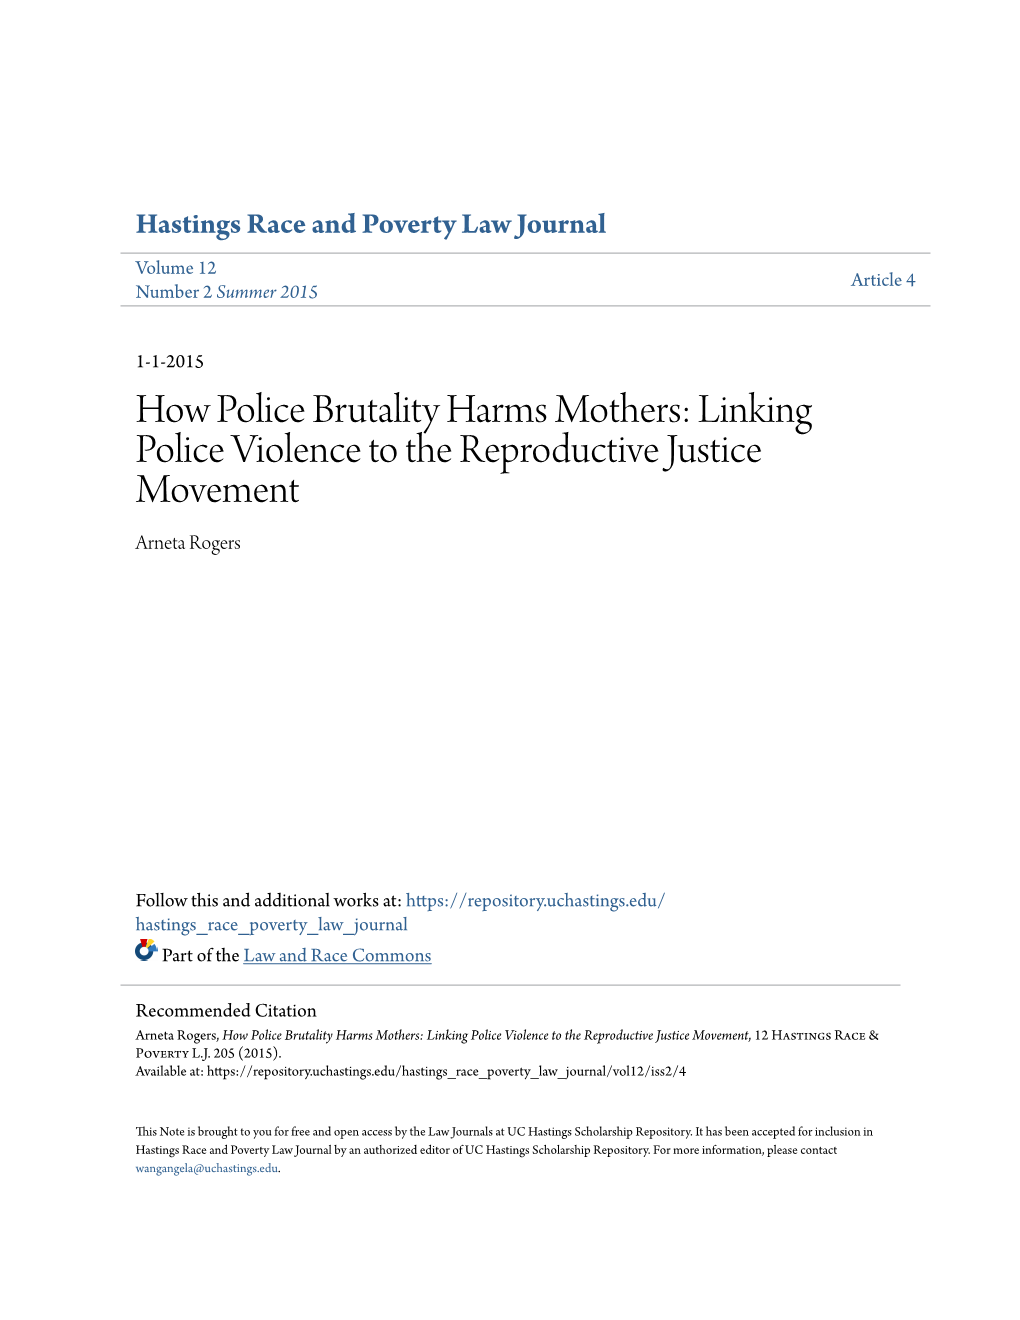 How Police Brutality Harms Mothers: Linking Police Violence to the Reproductive Justice Movement Arneta Rogers